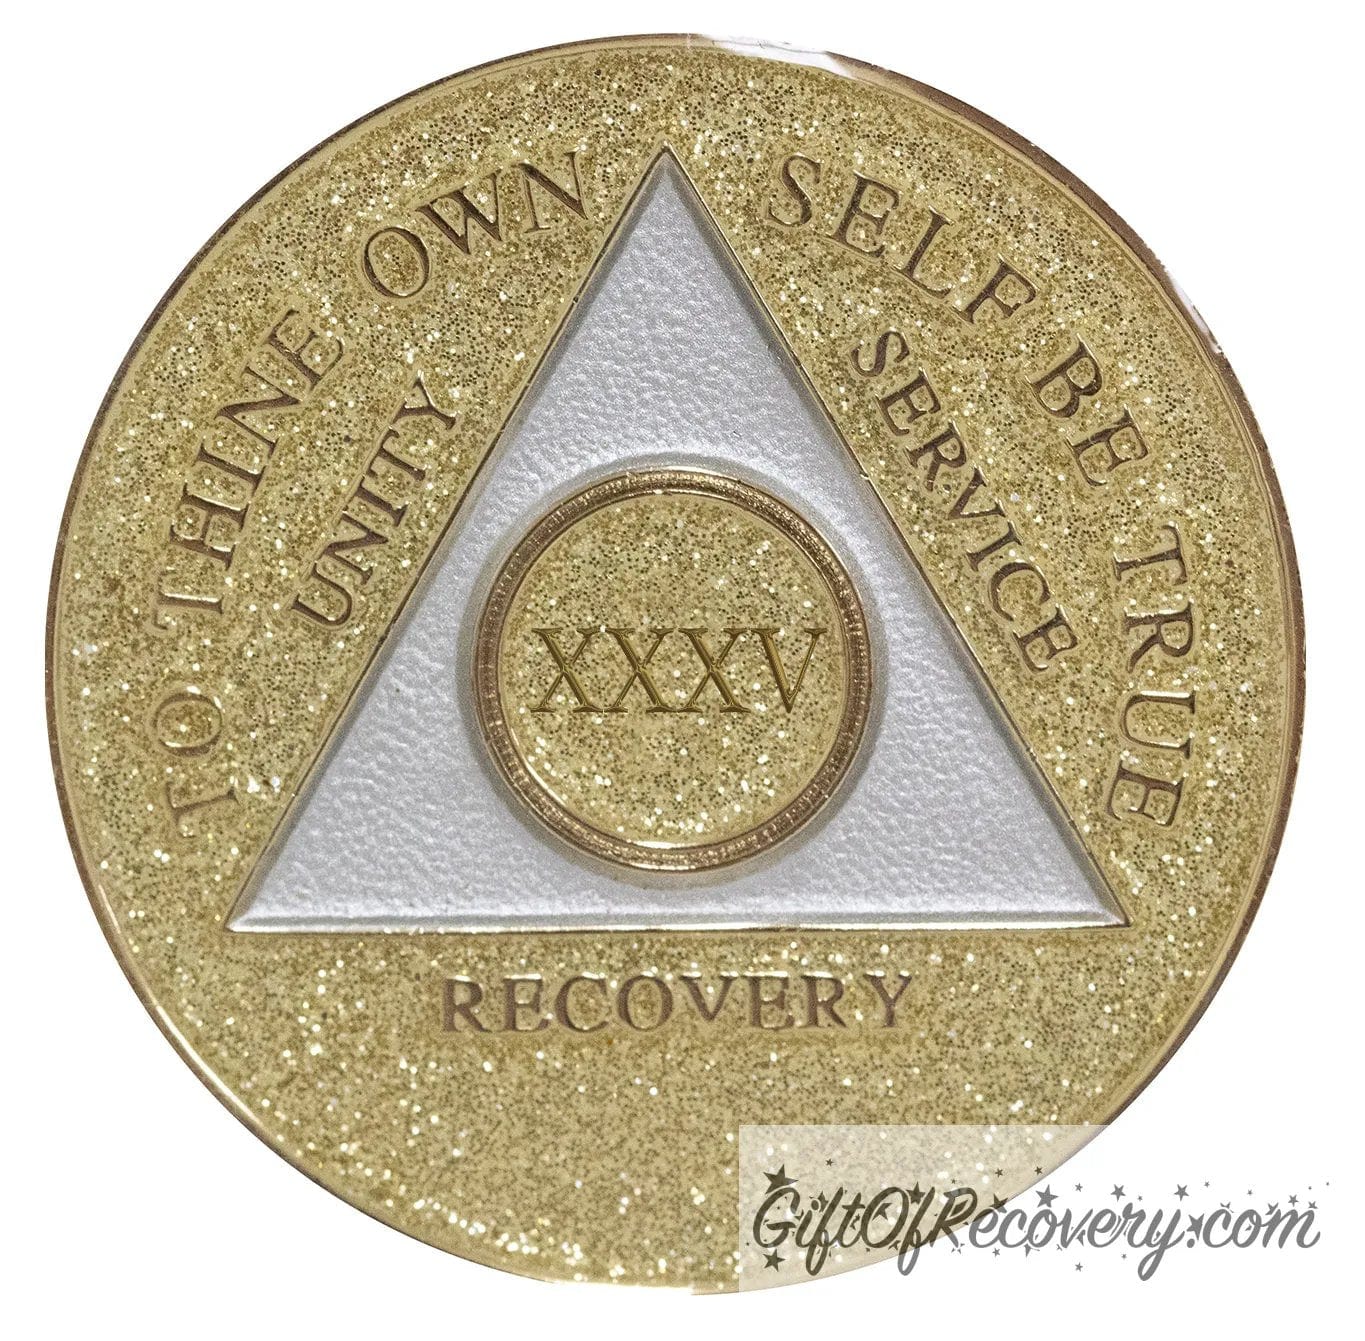 35 year AA medallion Gold glitter, with the triangle pearl white and to thine own self be true, unity, service, recovery, and the roman numeral embossed with 14k gold-plated brass, the recovery medallion is sealed with resin for a shiny finish that will last and is scratch proof.